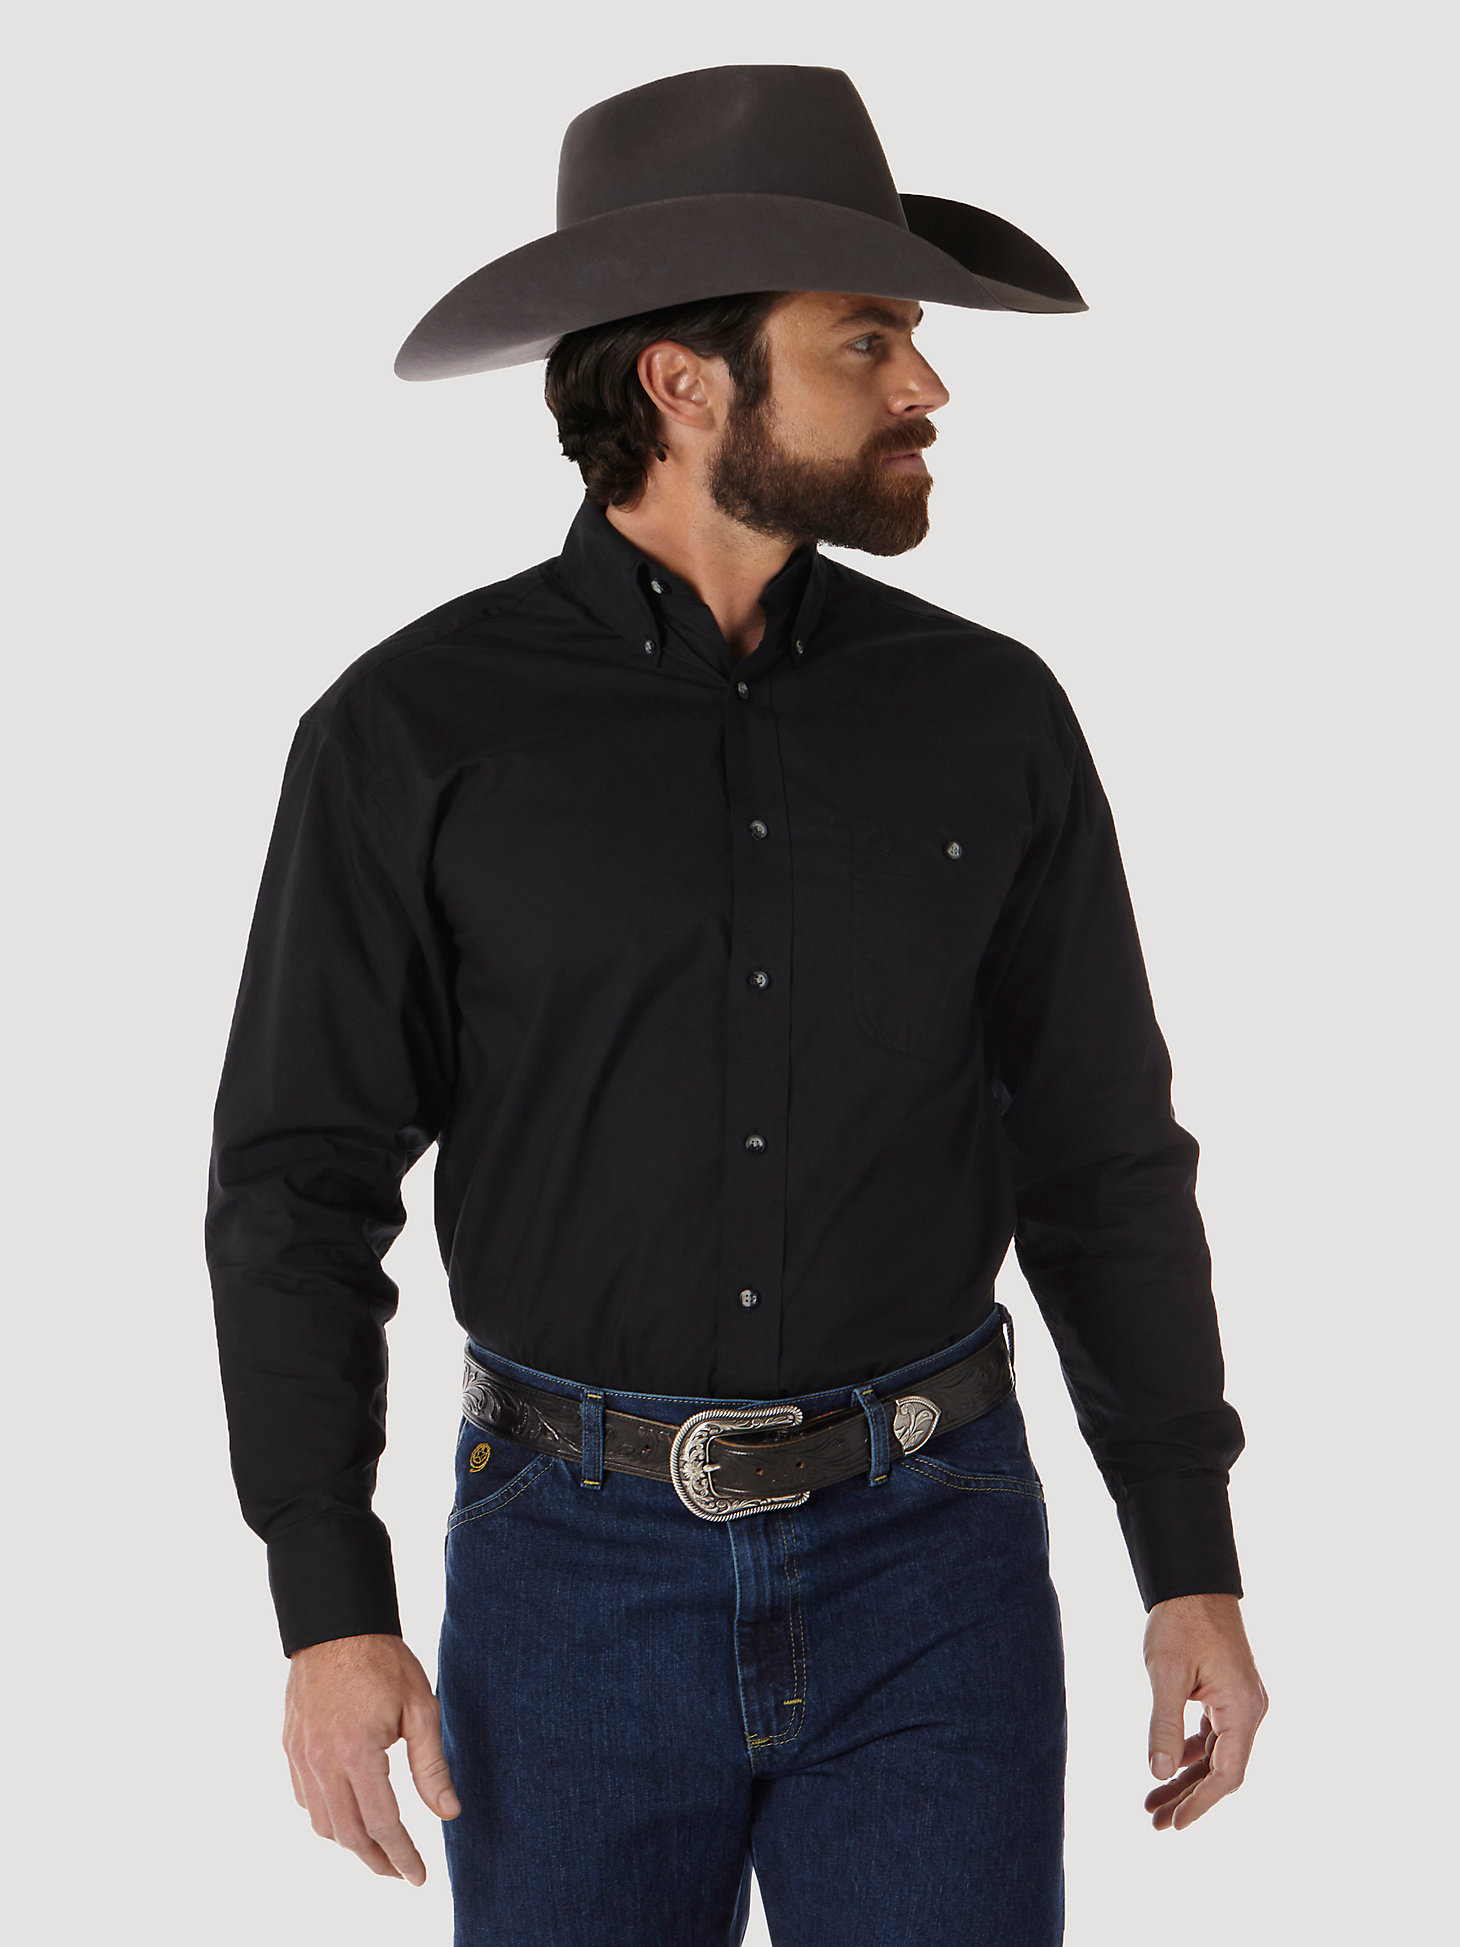 Men's George Strait Long Sleeve Button Down Solid Shirt in Black main view